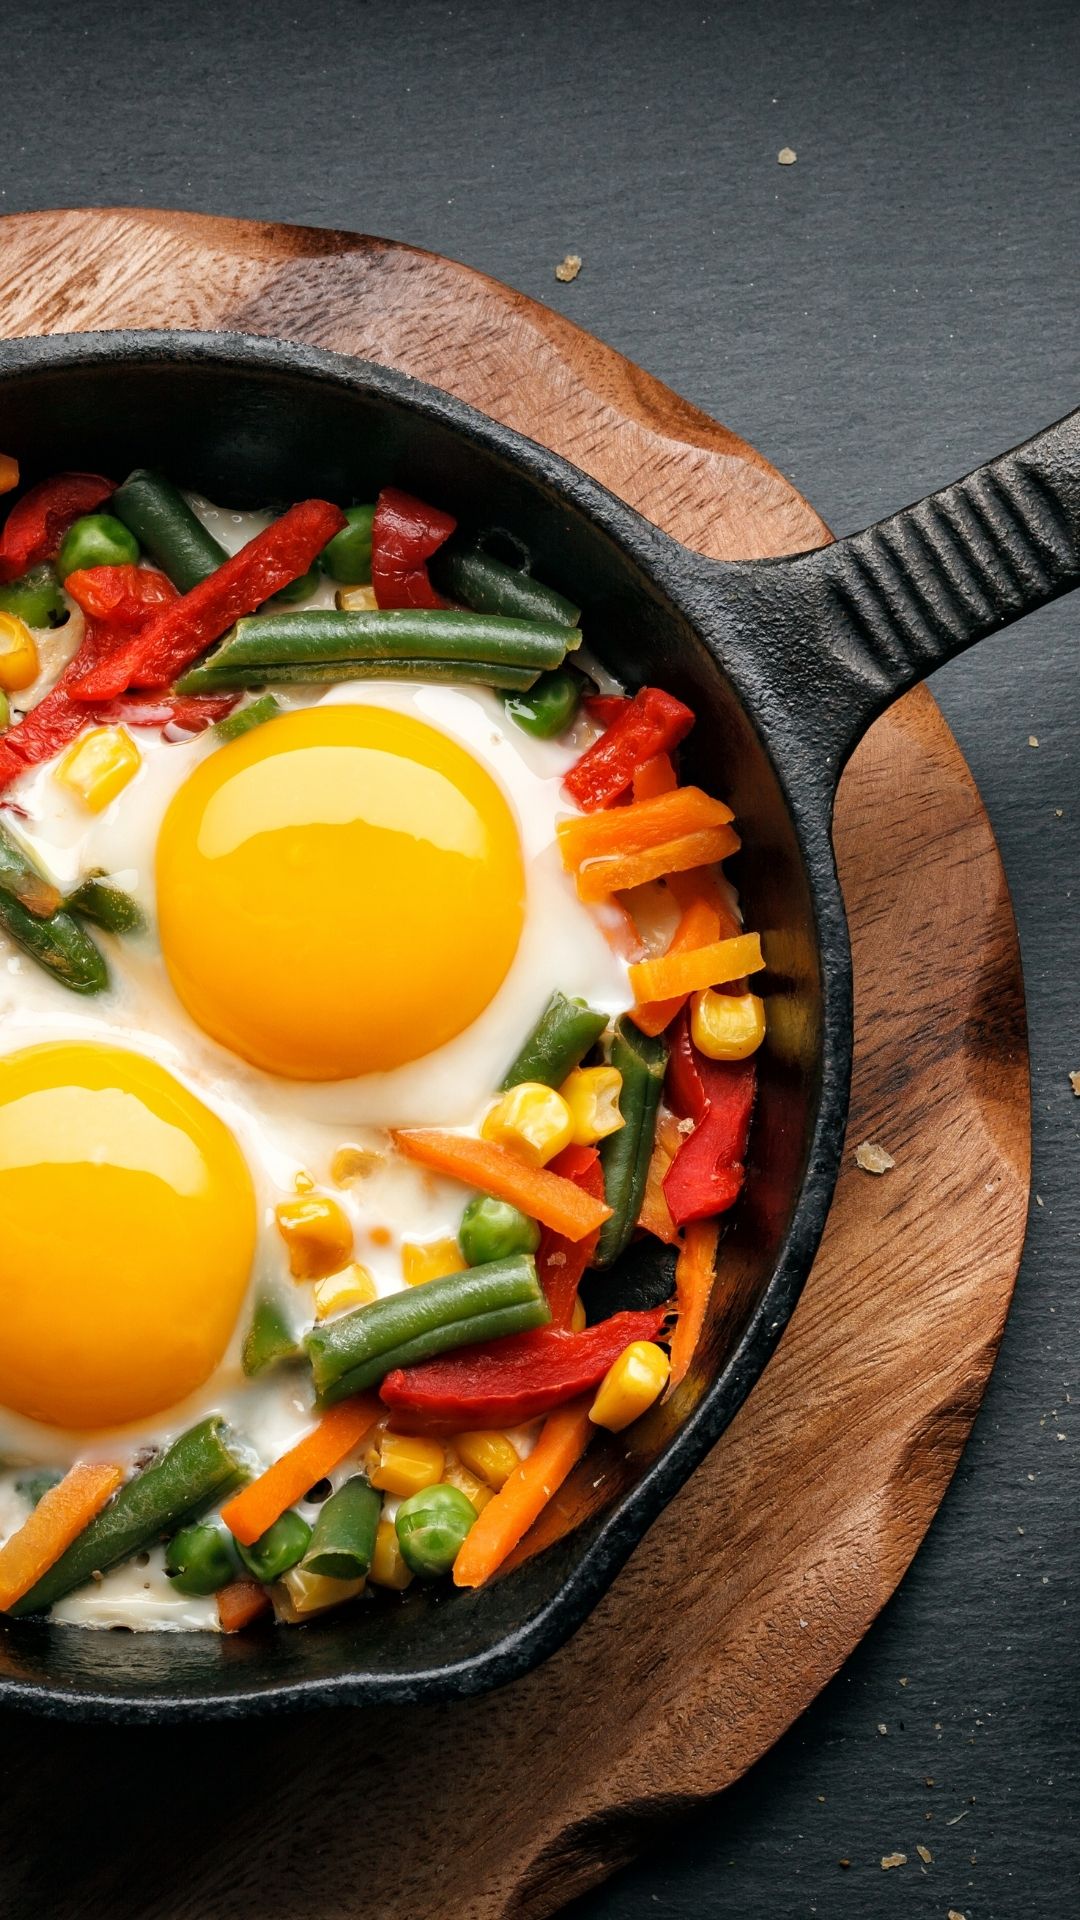 A cast iron pan with eggs and vegetables is a great way to cook breakfast over a campfire